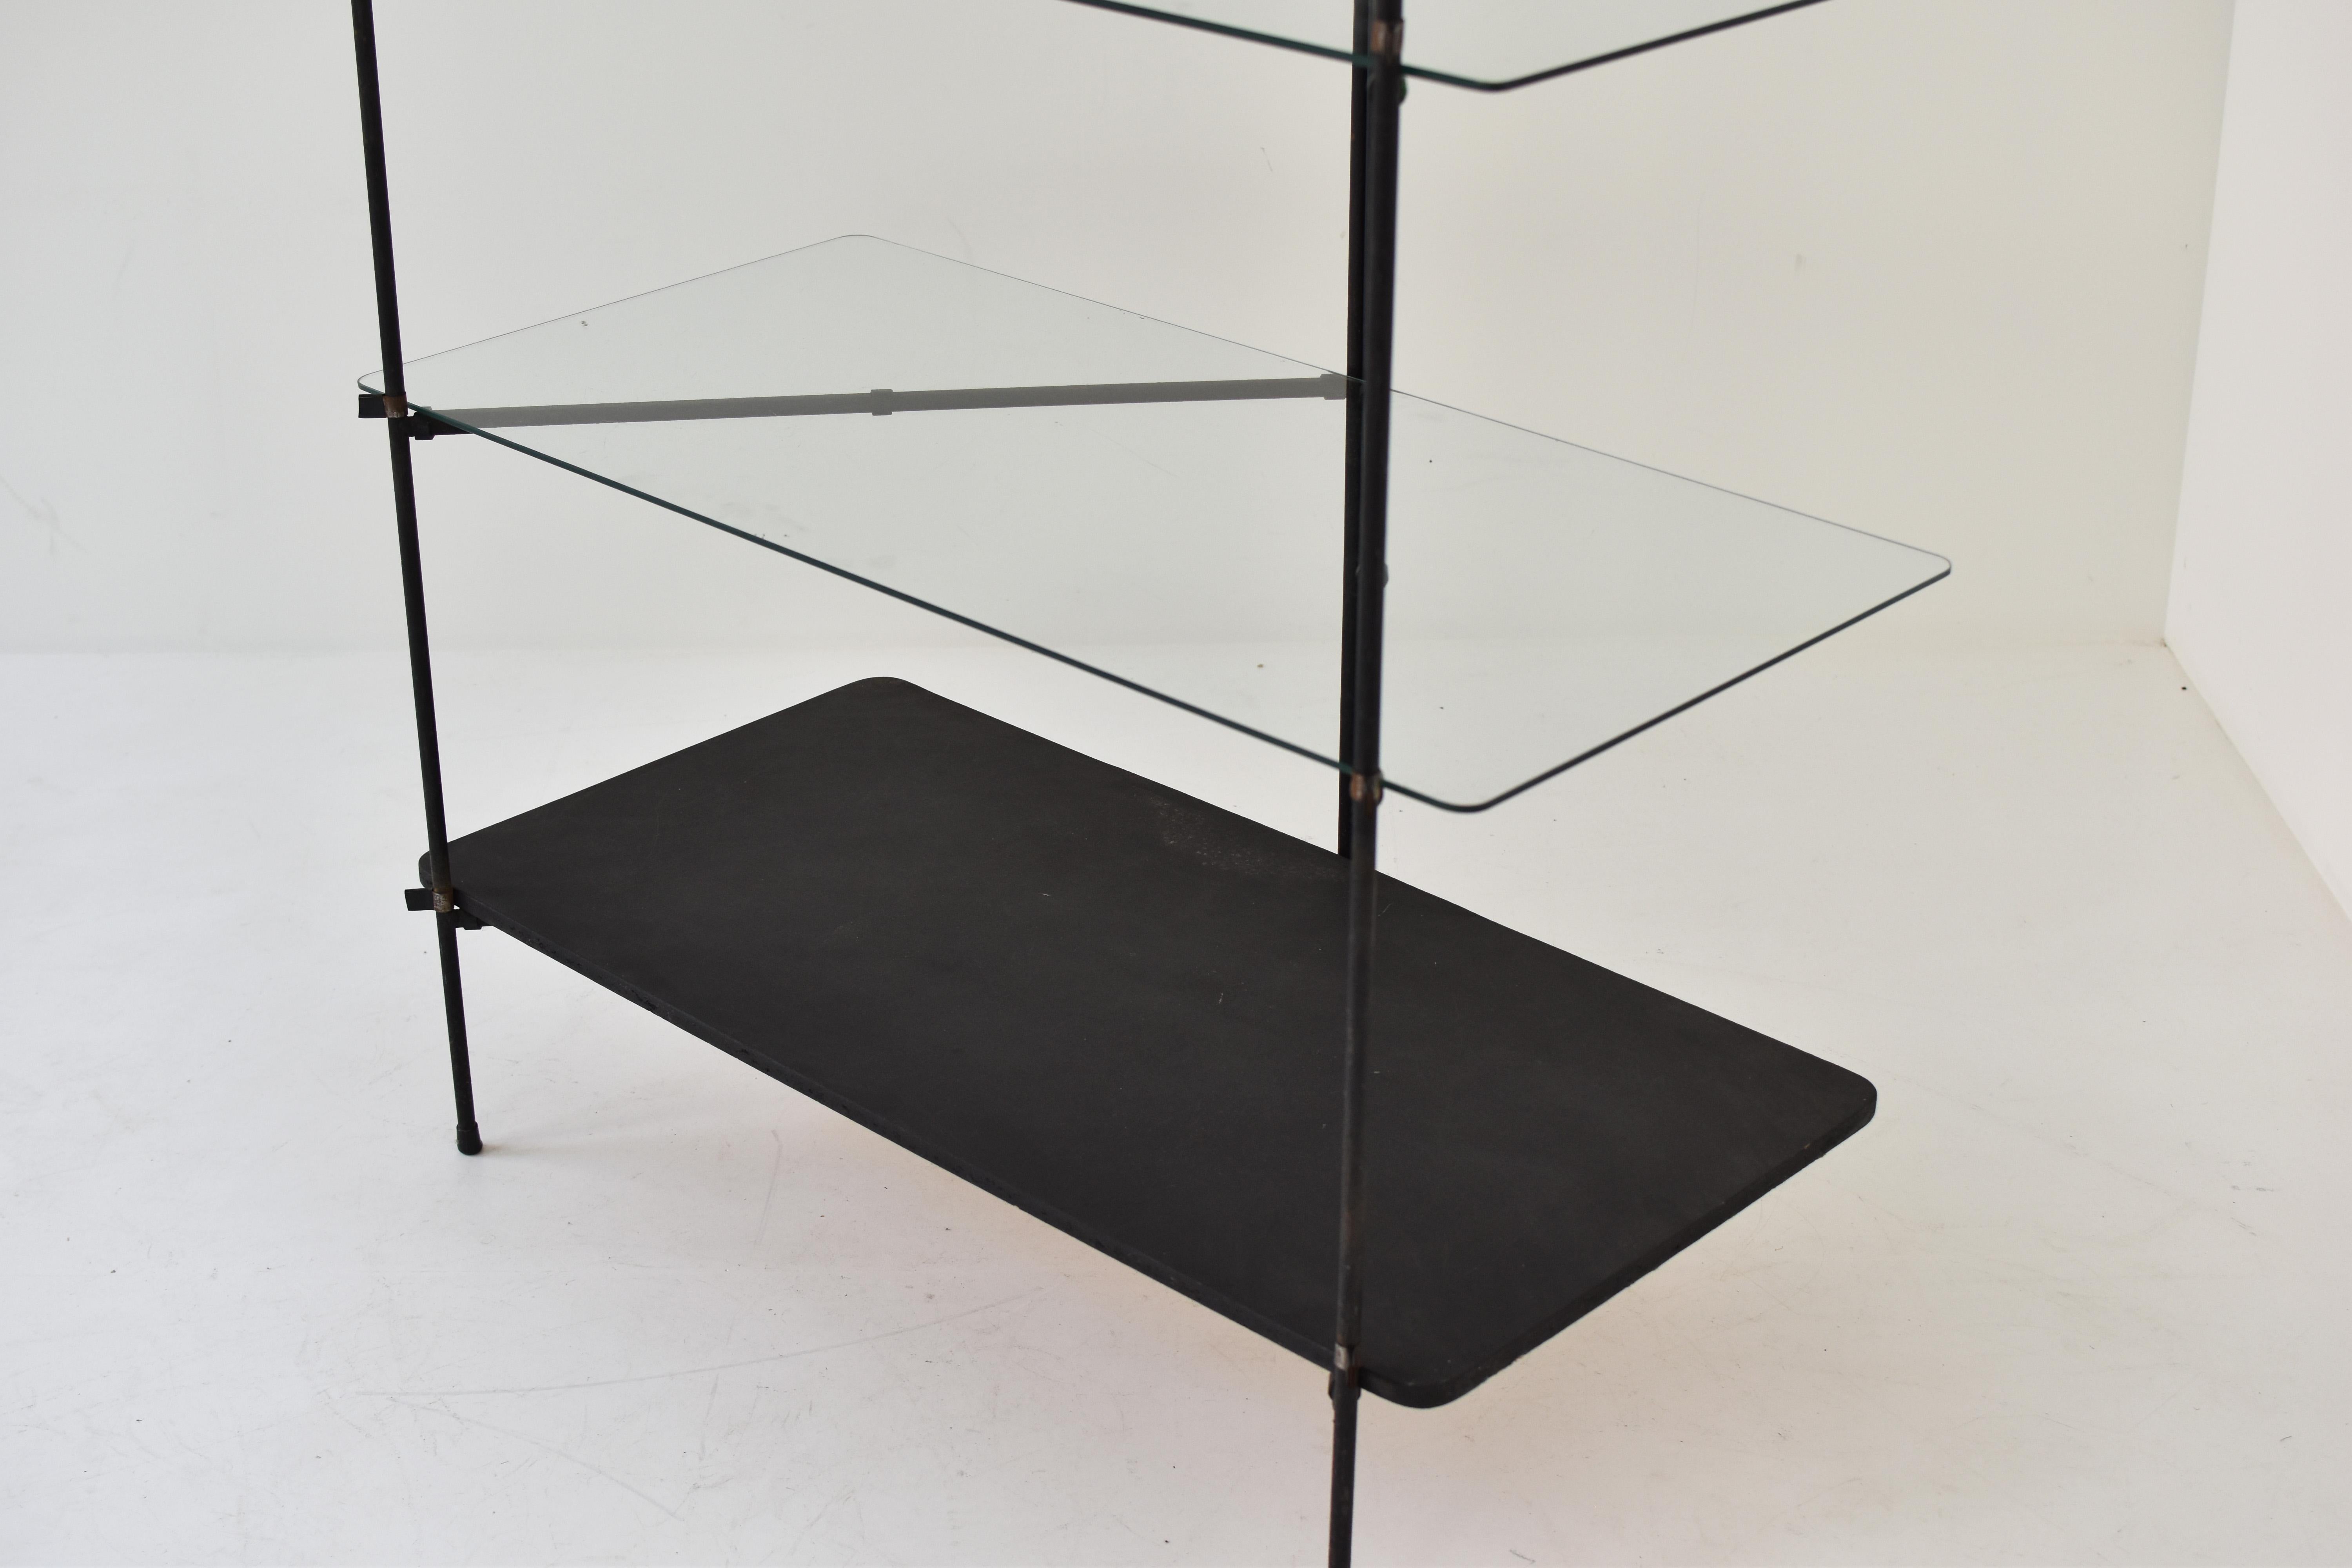 Steel Minimal Shelving / Display Unit Dating from the 1960s